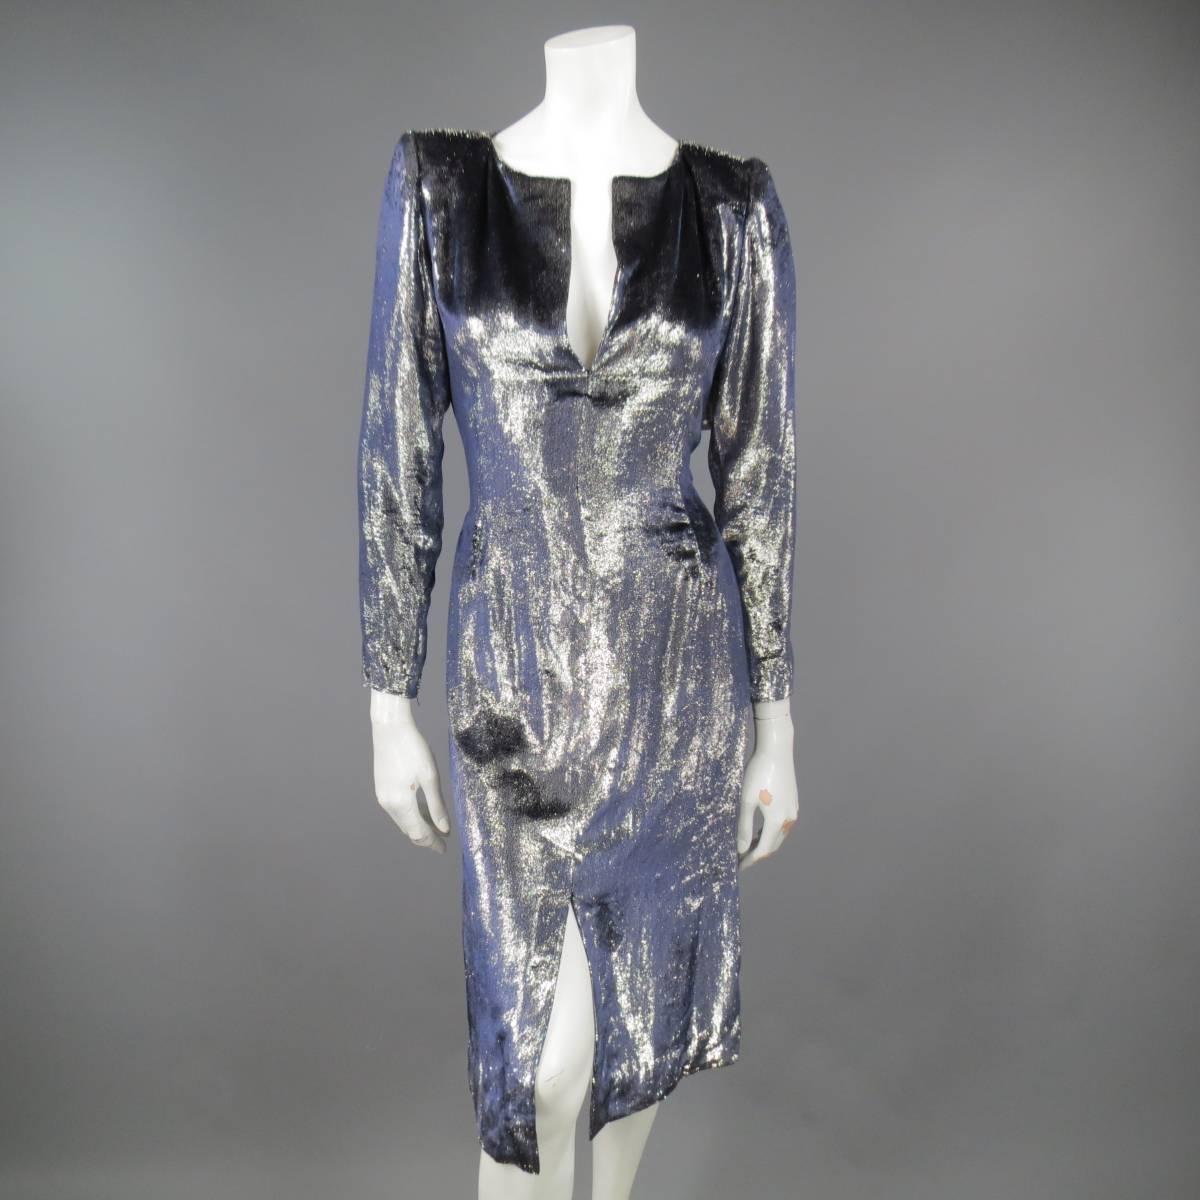 This fabulous vintage JEAN-LOUIS SCHERRER for Wilkes Bashford cocktail dress comes in a high shine silver foil navy velvet material and features a slit V neck, padded shoulders, long sleeve with zip closure, back zip, and frontal slit. Made in